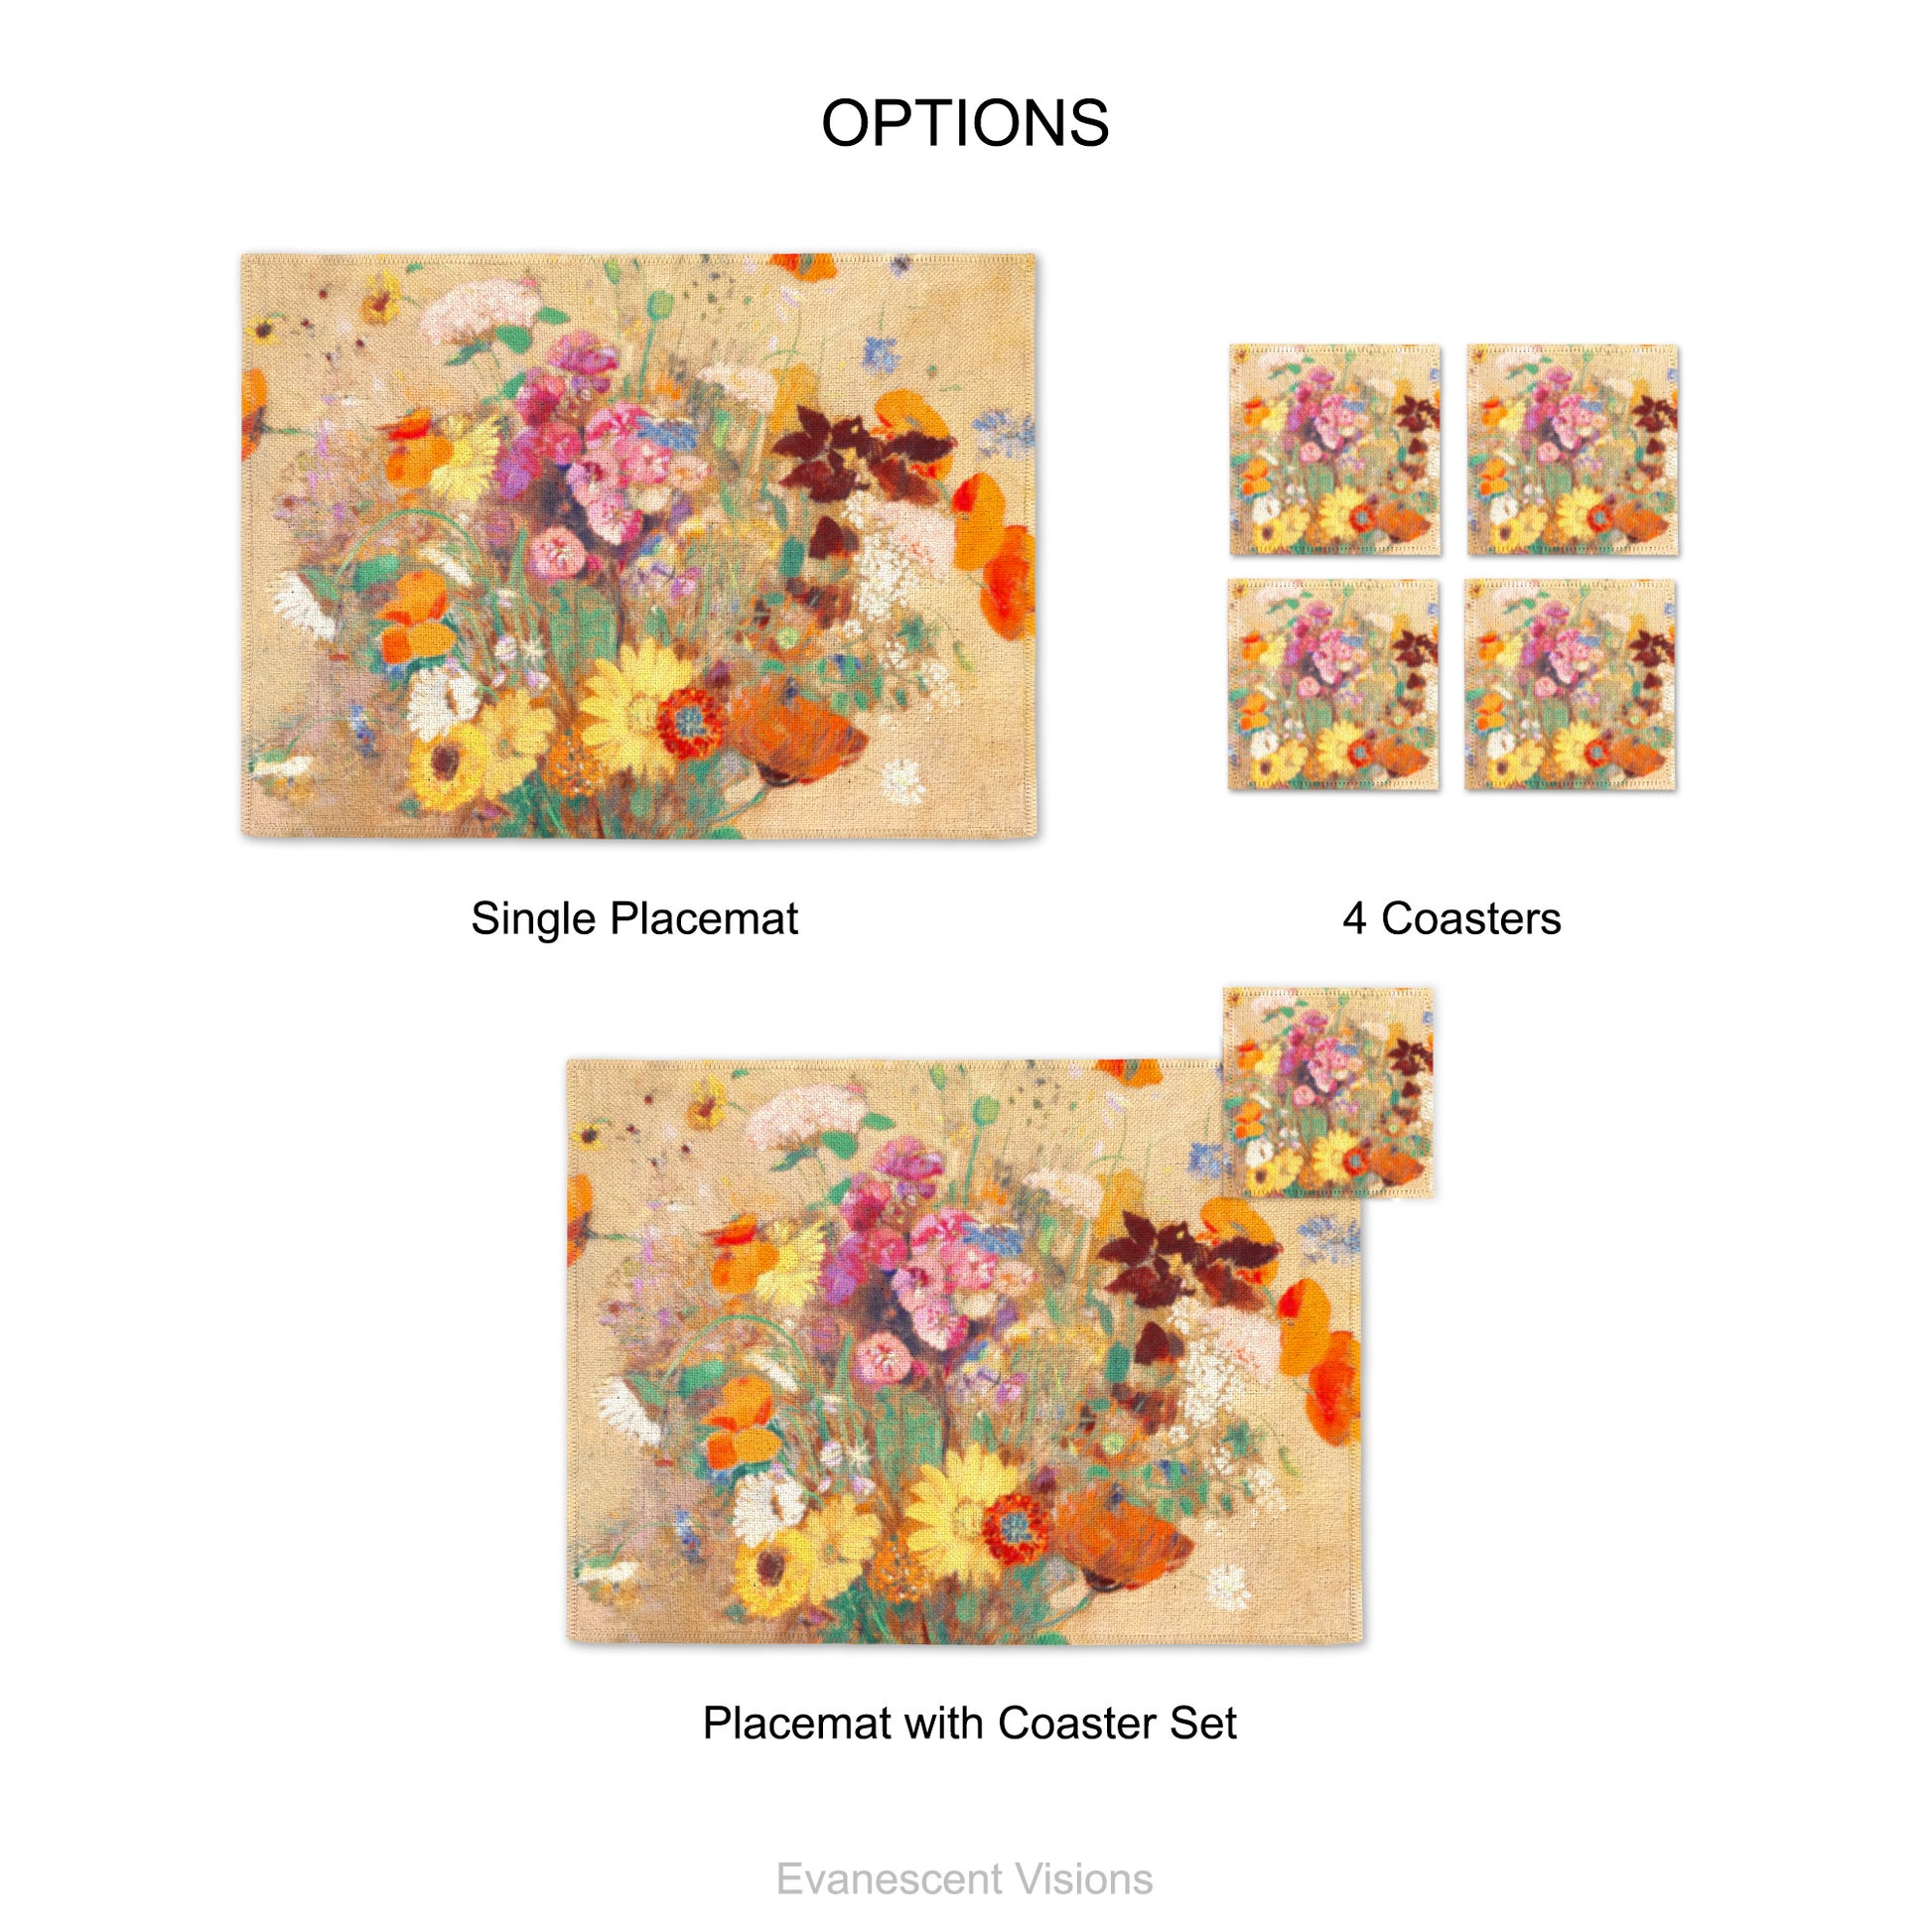 Product options shows single placemat, set of 4 coasters and placemat with coaster set. Design is from painting 'Bouquet of Wildflowers' by Odilon Redon.